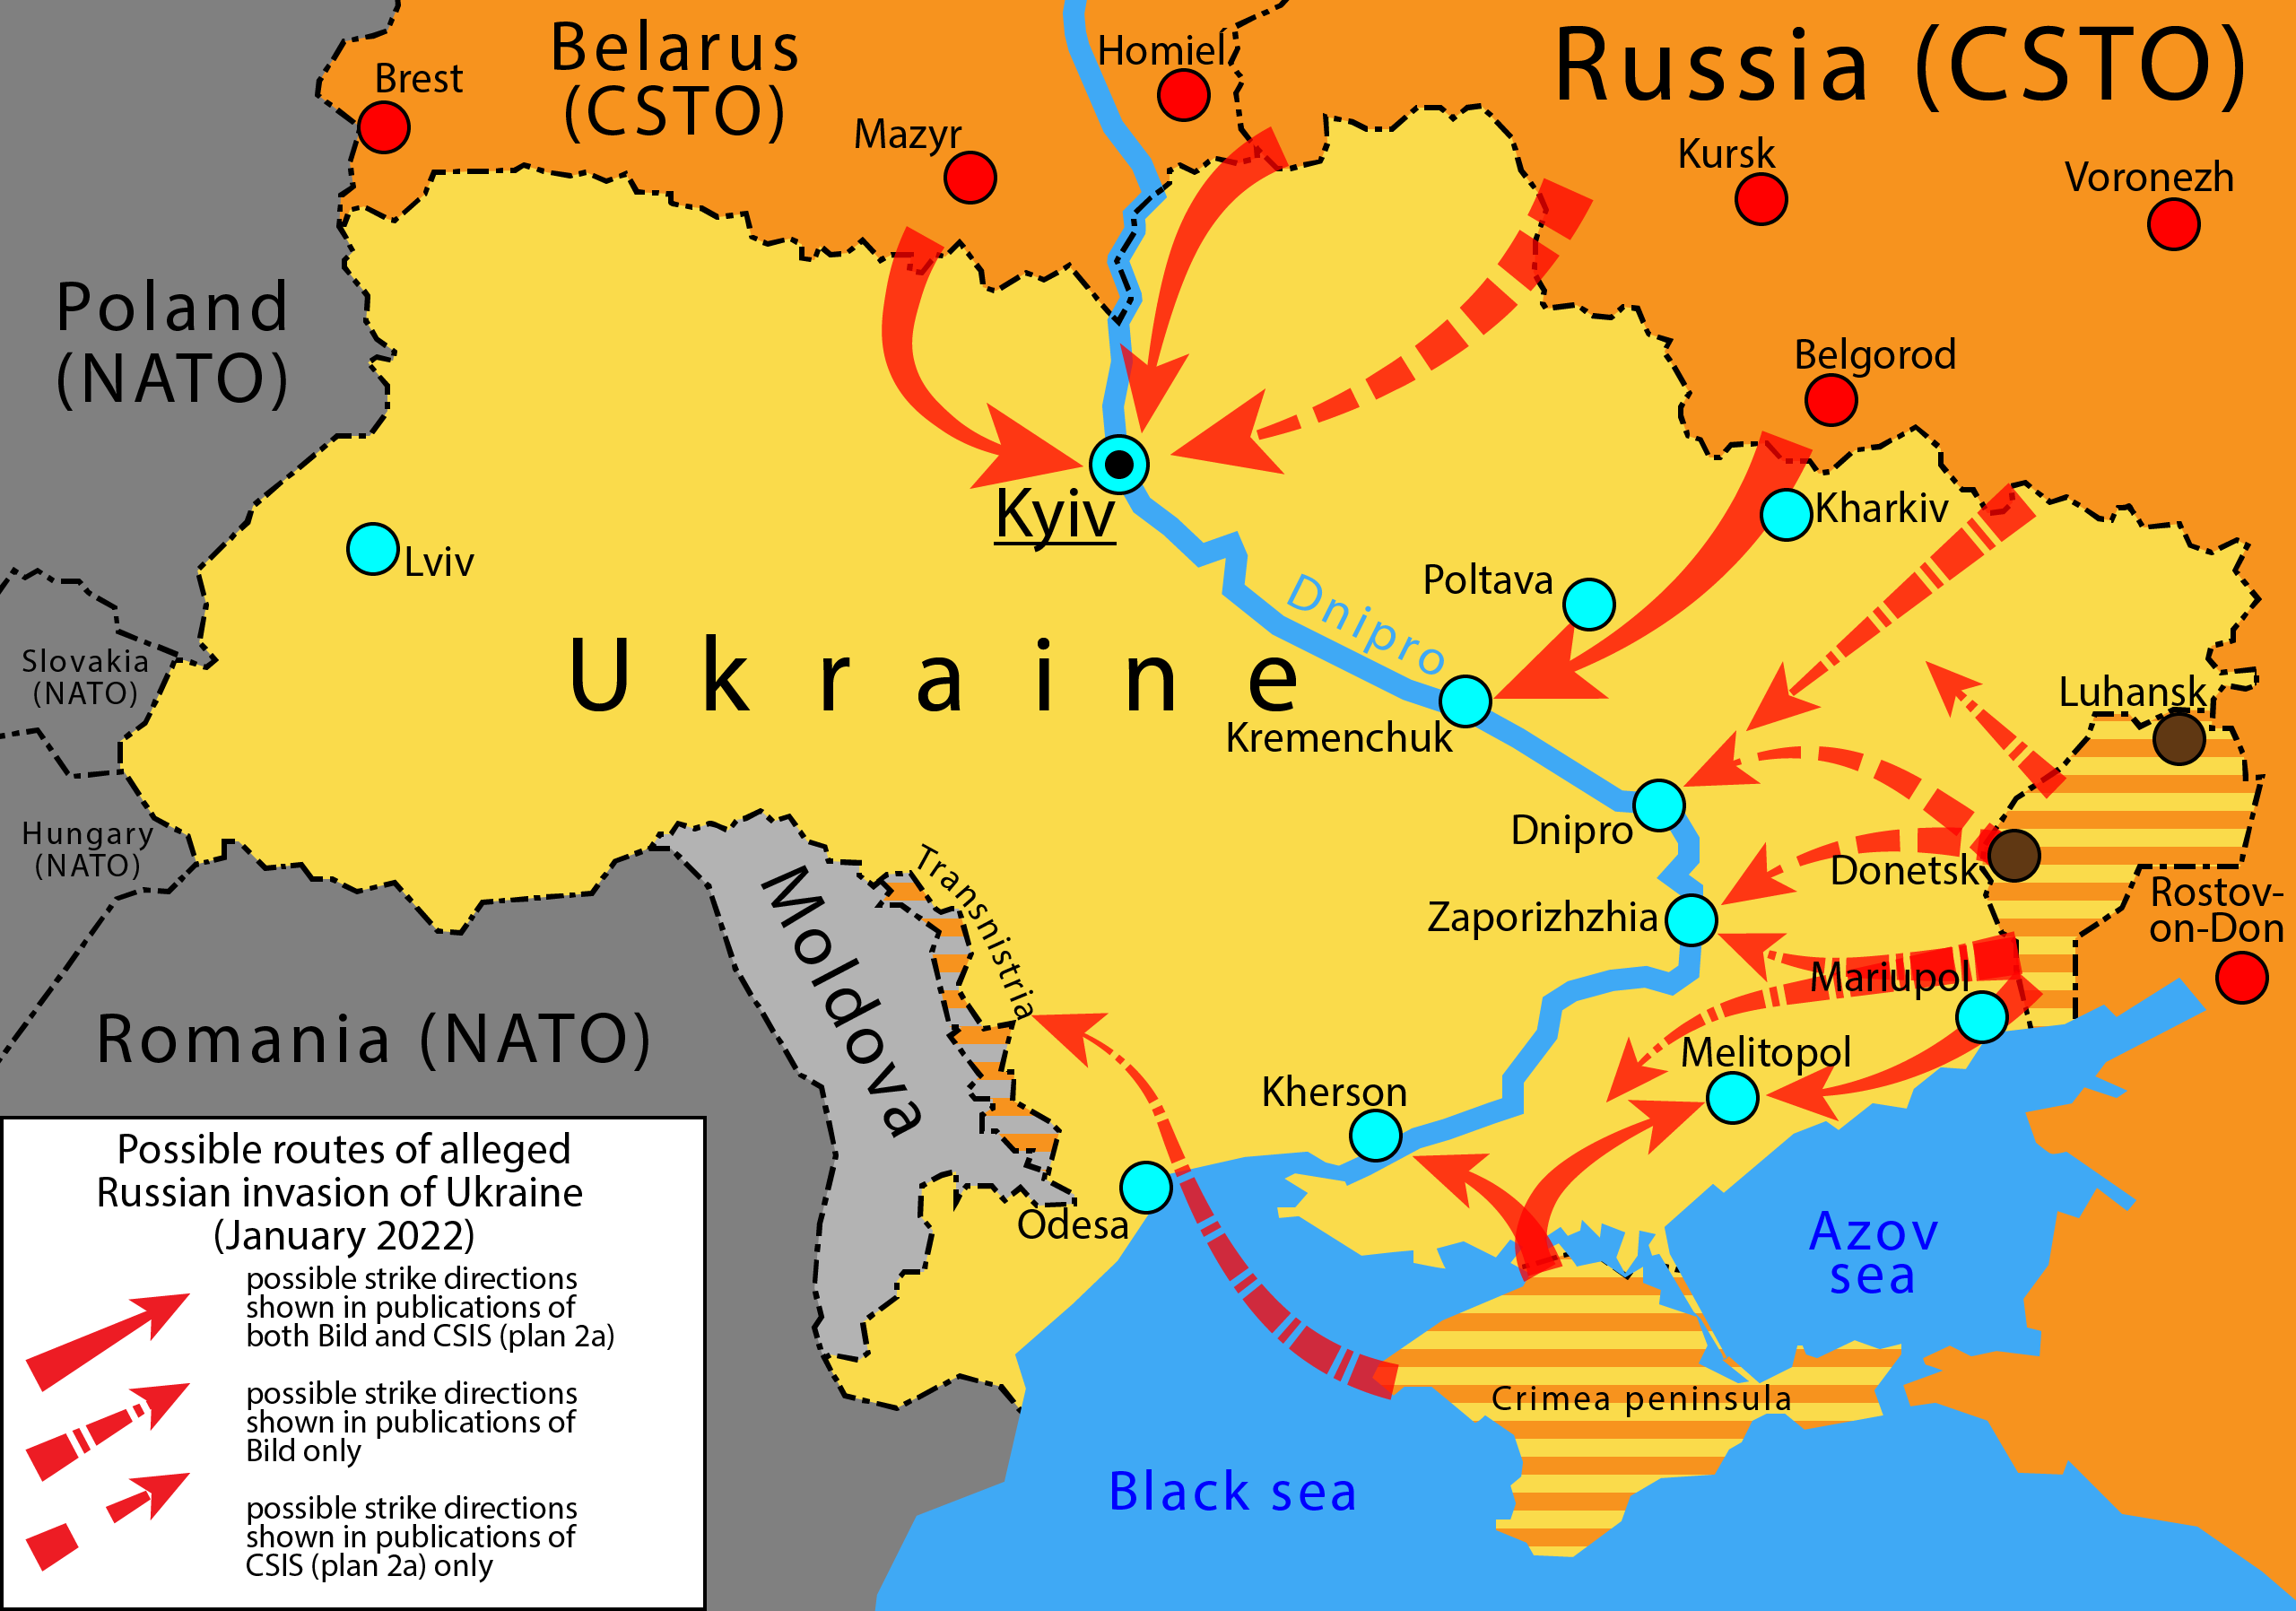 Possible_routes_of_alleged_Russian_invasion_of_Ukraine_%28January_2022%29.png